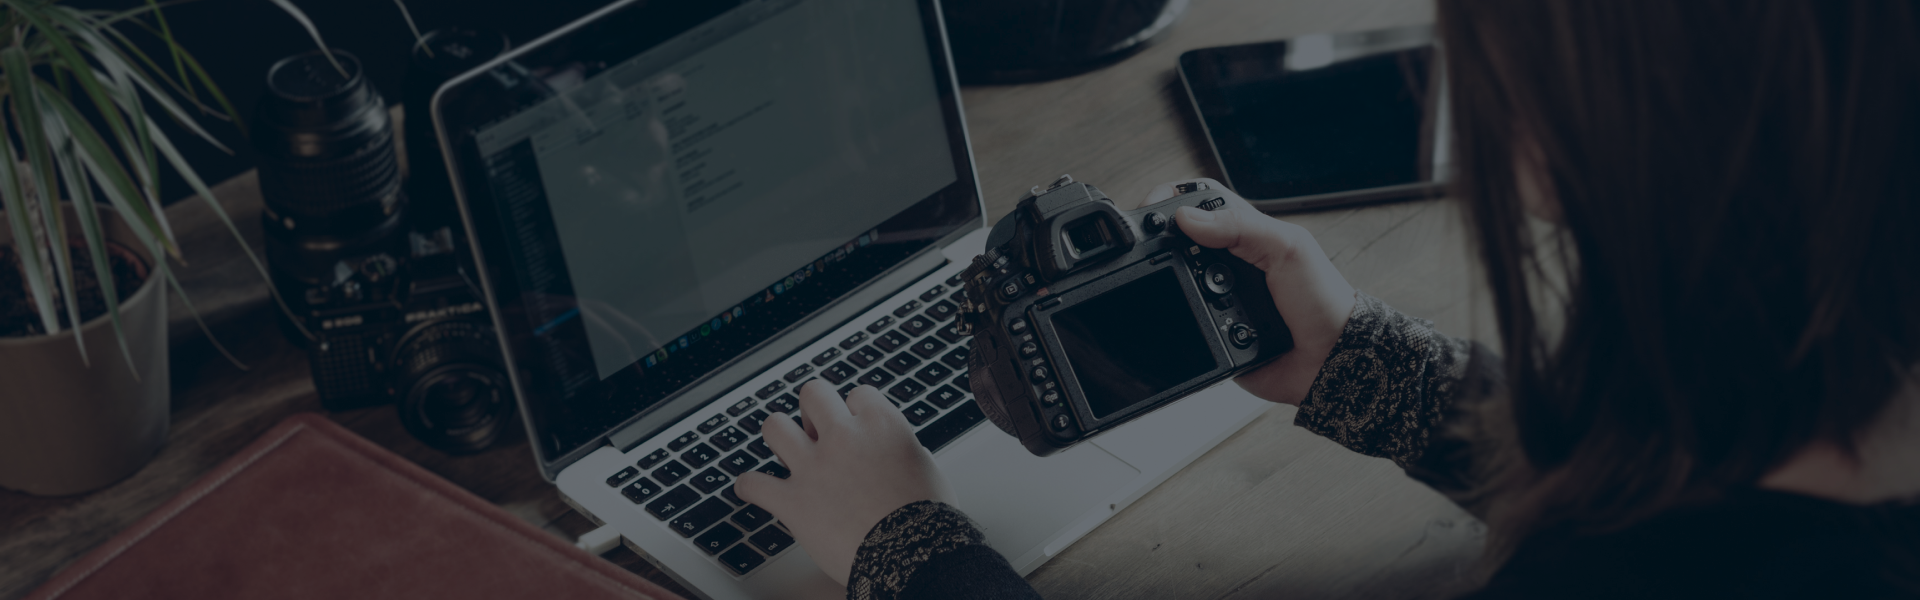 SEO For Photographers Made Easy